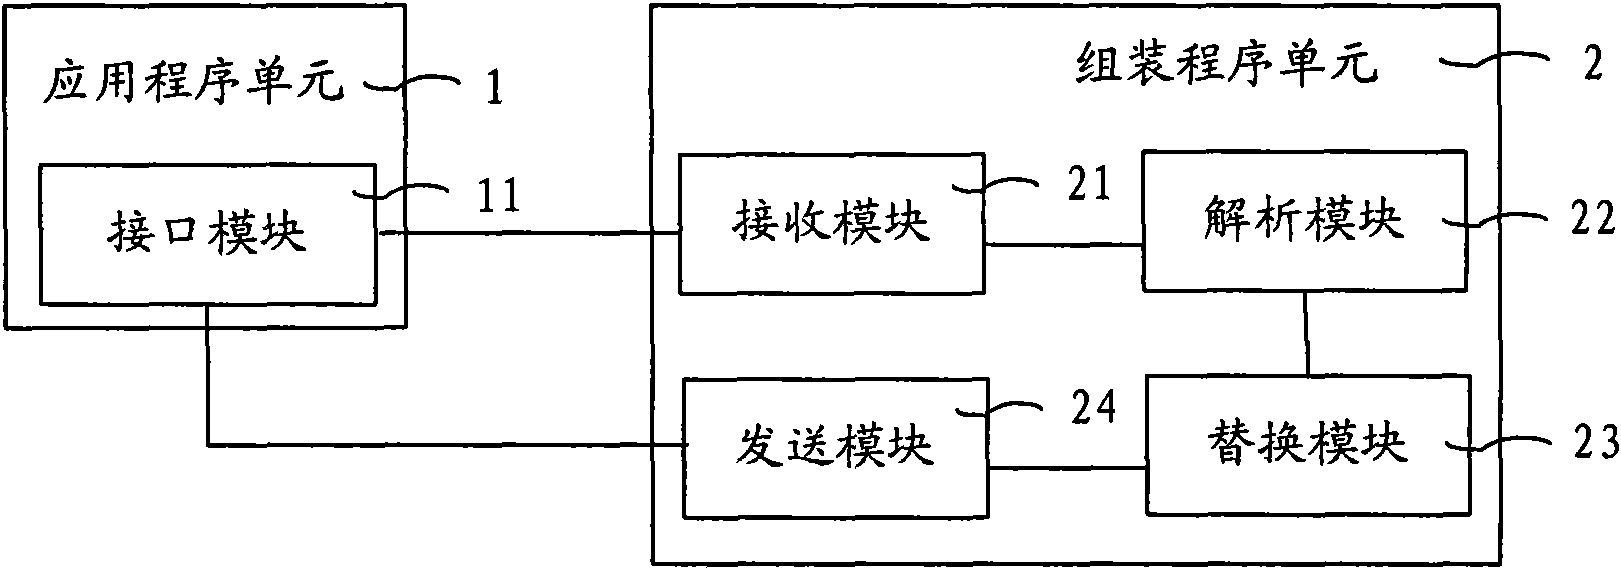 Short message processing method, system and assembly program unit